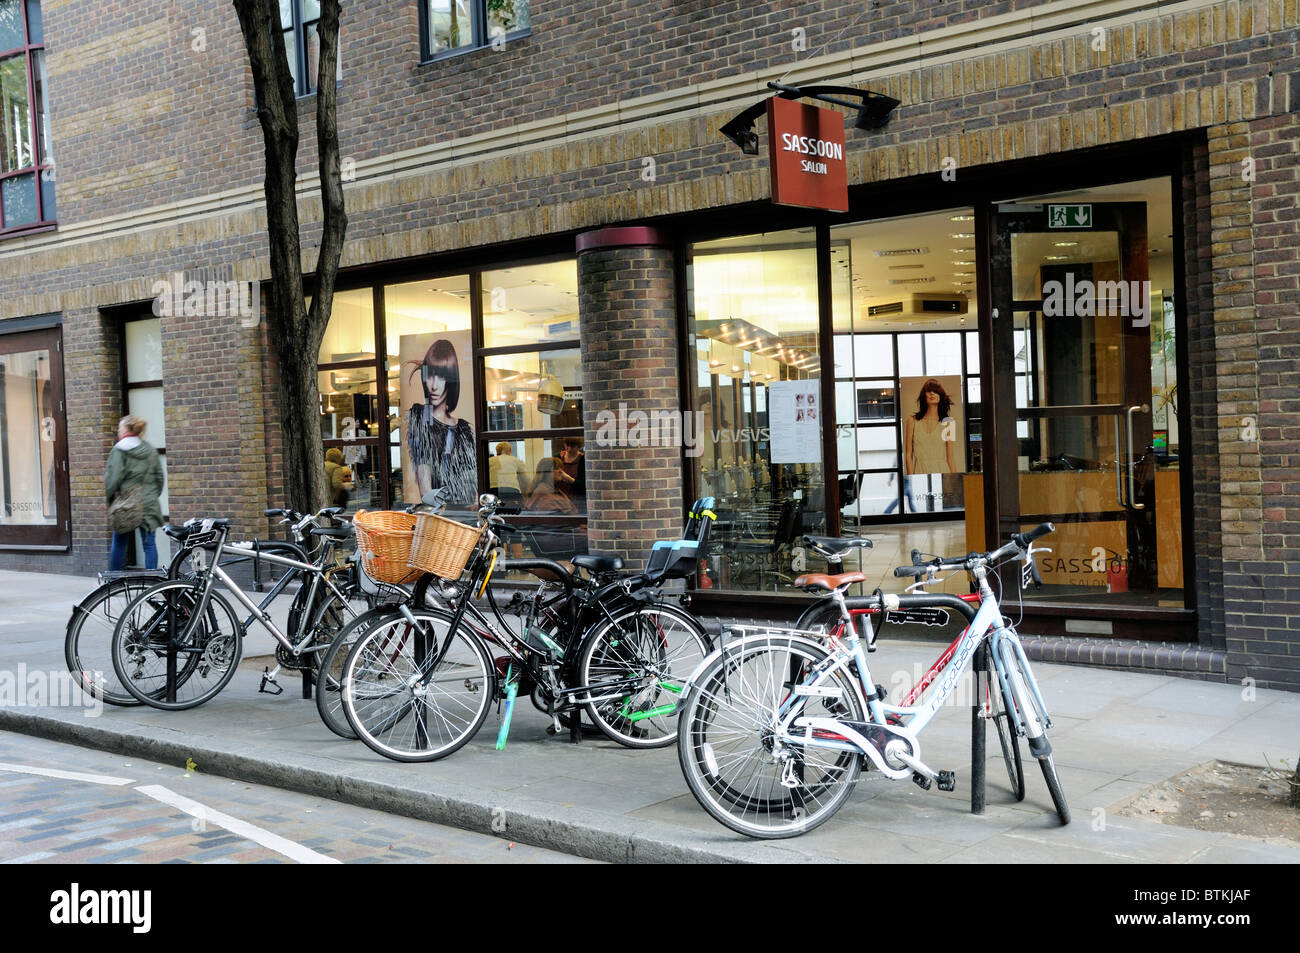 Vidal Sassoon hairdressing salon in Covent Garden with bike parking in front, London England Britain UK Stock Photo